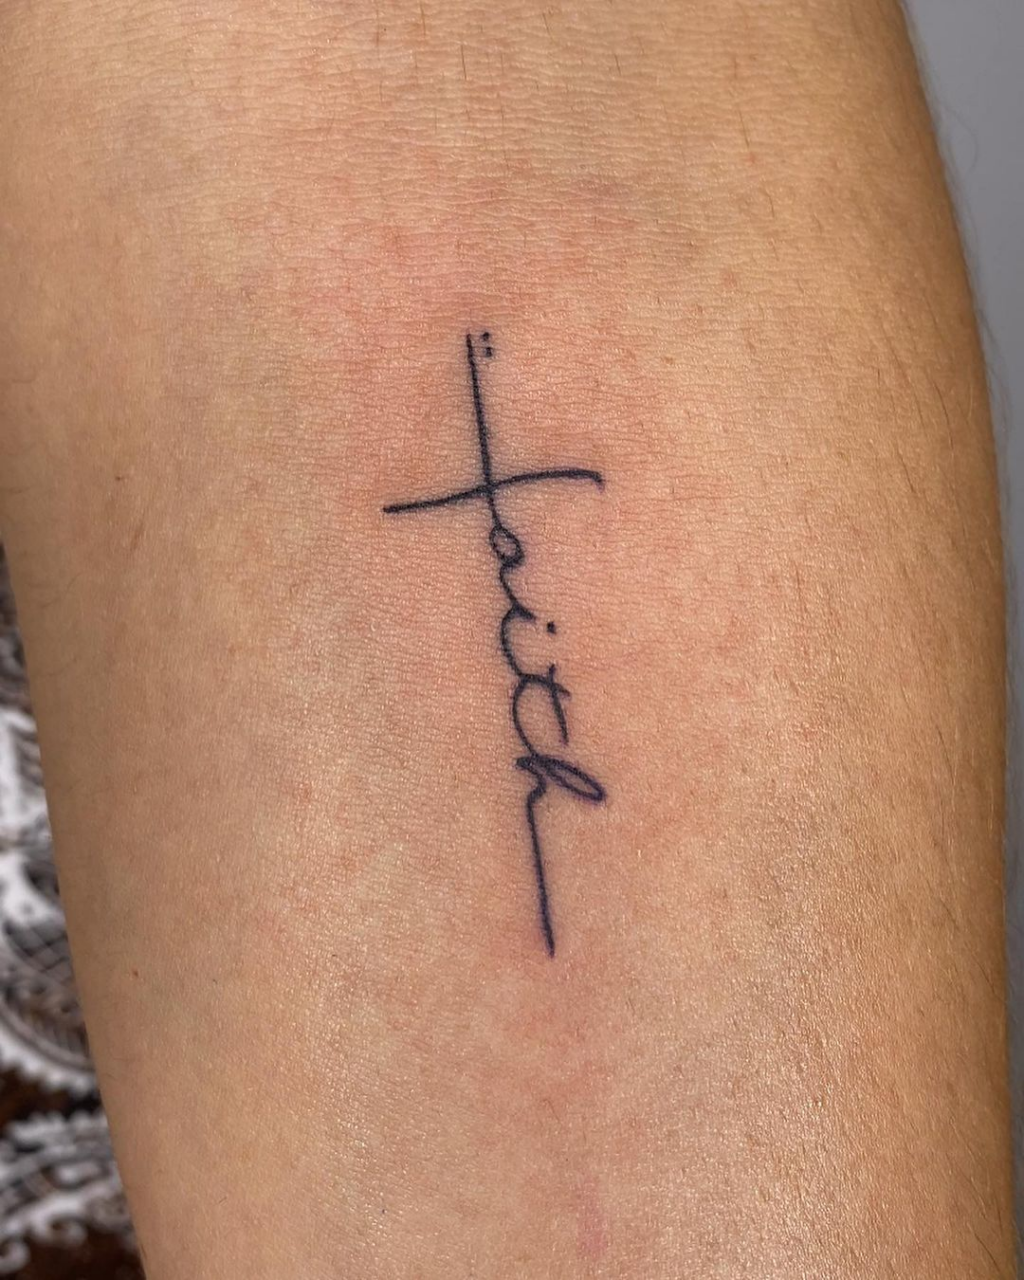 75+ Unbeaten Faith Tattoo Ideas with Meanings You'll Love